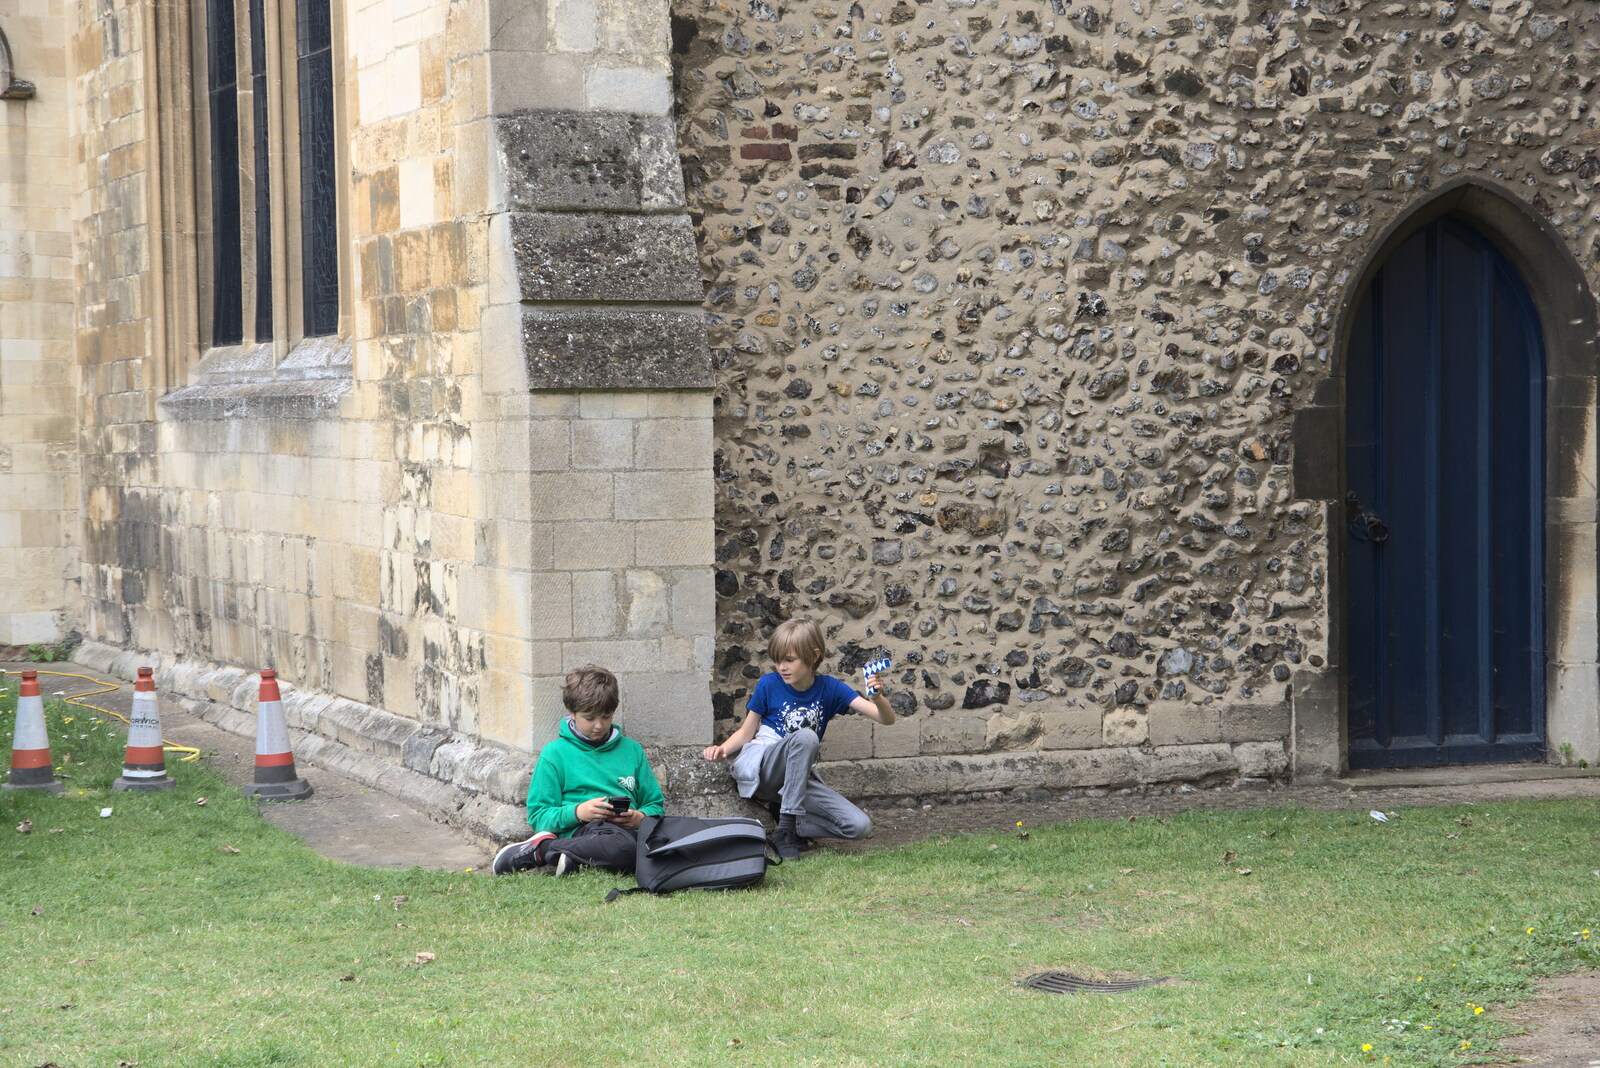 The boys lean against a wall as we queue from Dippy and the City Dinosaur Trail, Norwich, Norfolk - 19th August 2021